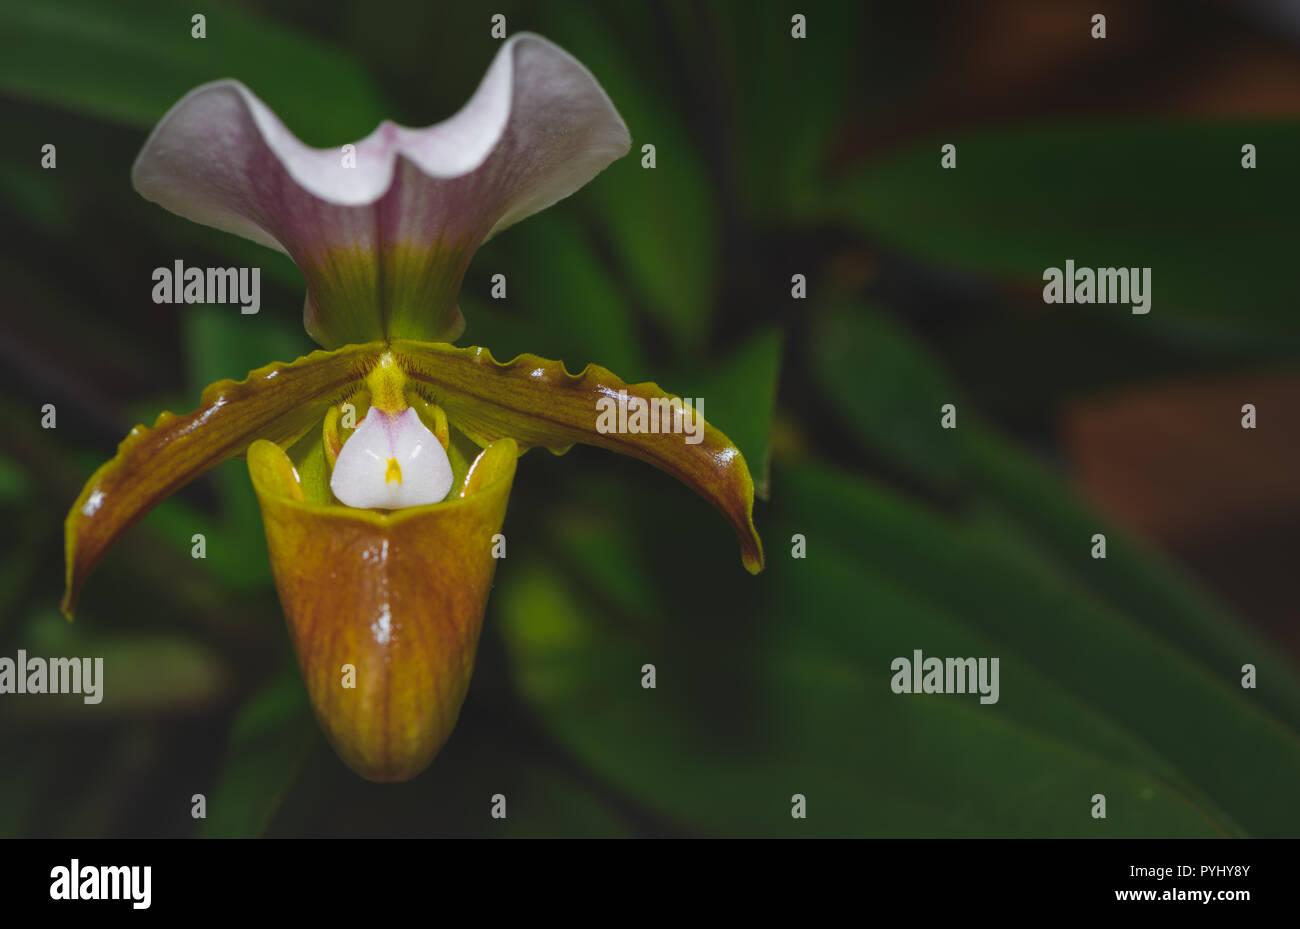 Lady's slipper orchid, aka lady slipper orchid or slipper orchid (Cypripedioideae Paphiopedilum), Stock Photo